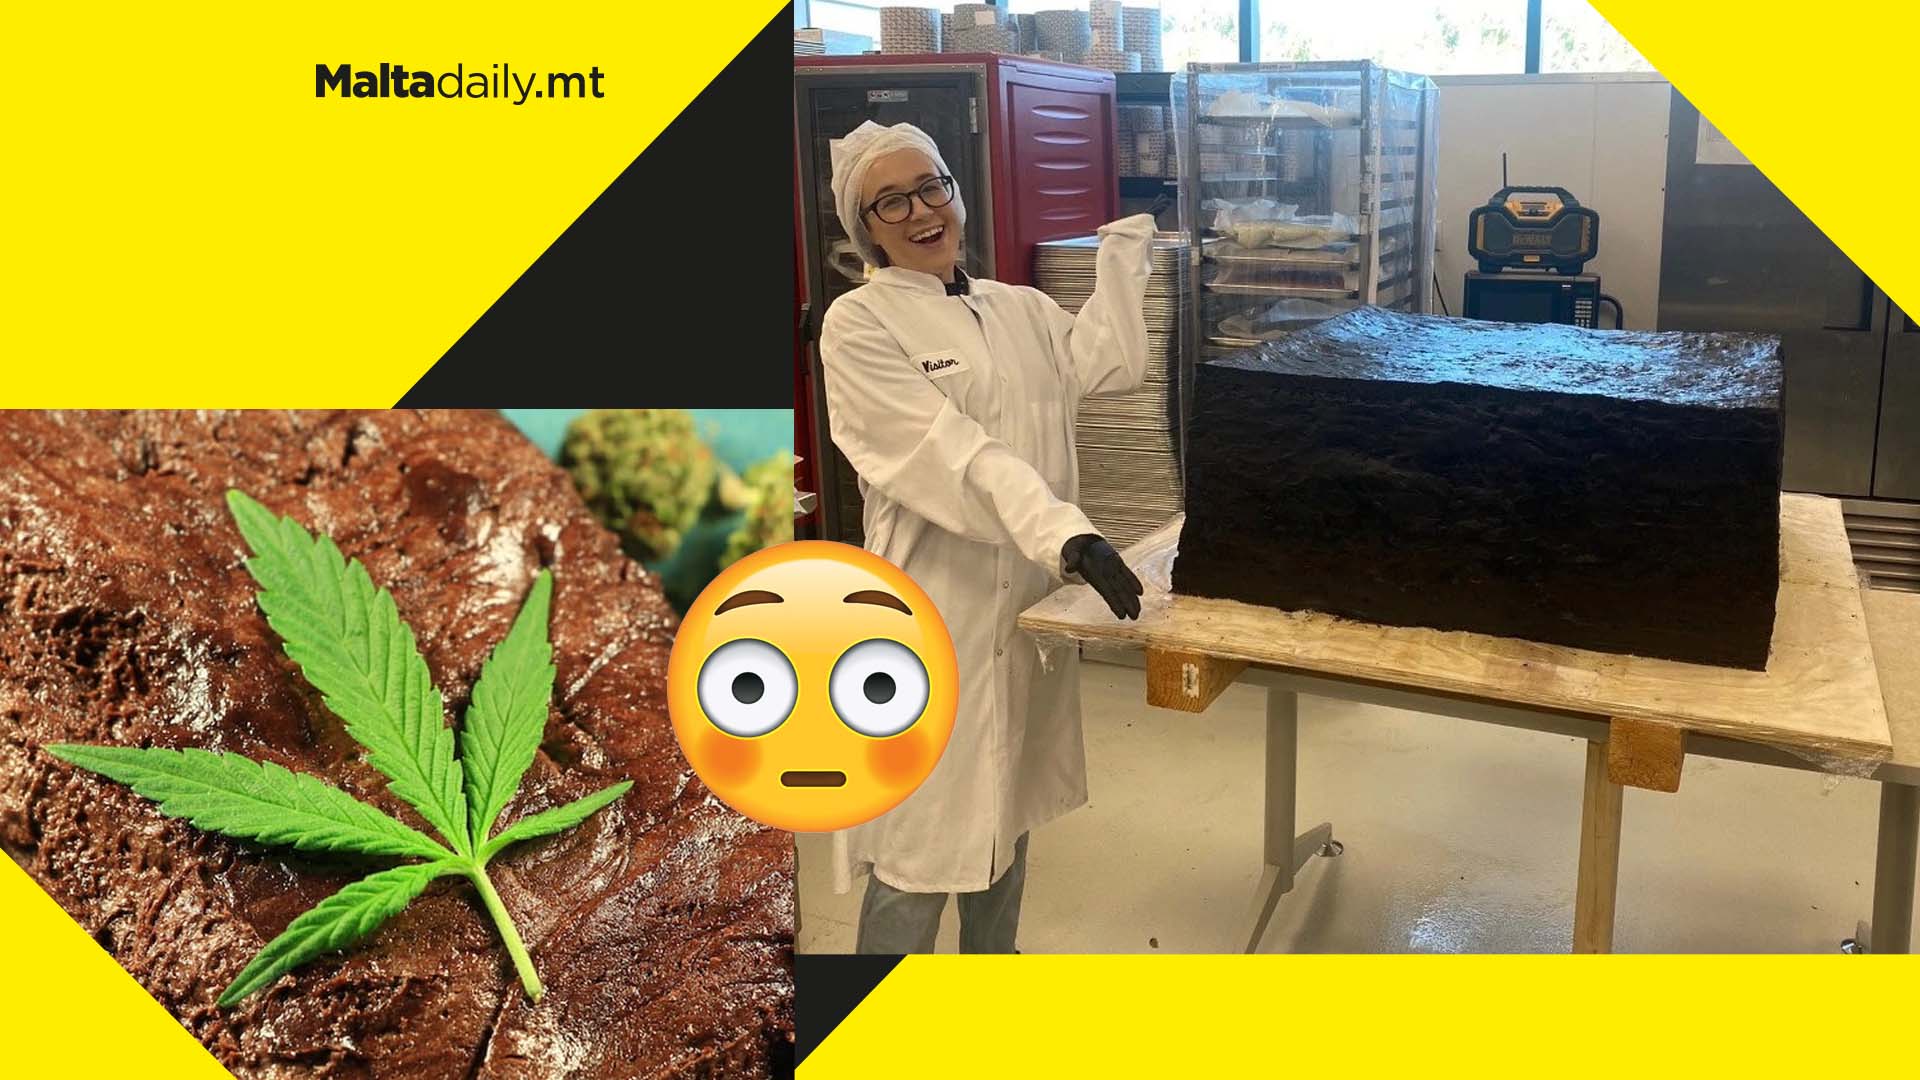 This 850 pound edible could be the world’s largest weed brownie